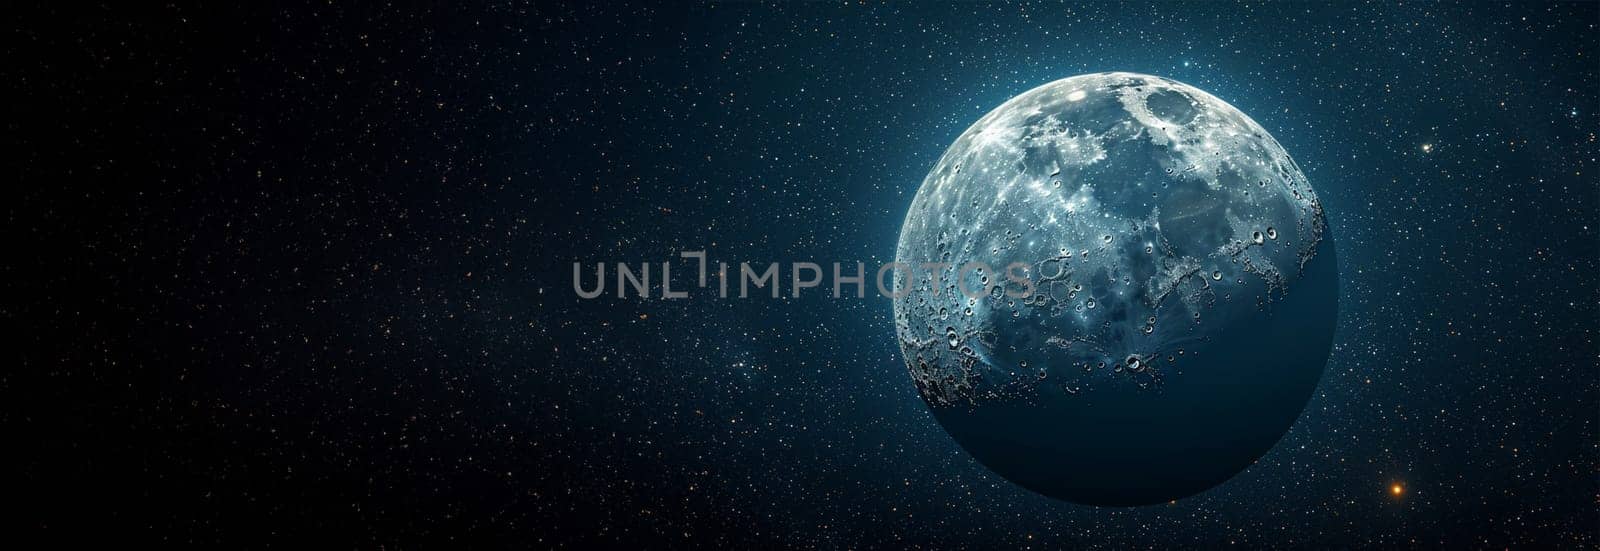 Universe space milky way galaxy with moon. The infinite deep space cosmos. Grainy texture and soft-focus background. Night sky Milky way with full Moon and universe. Copy space Space for text web banner